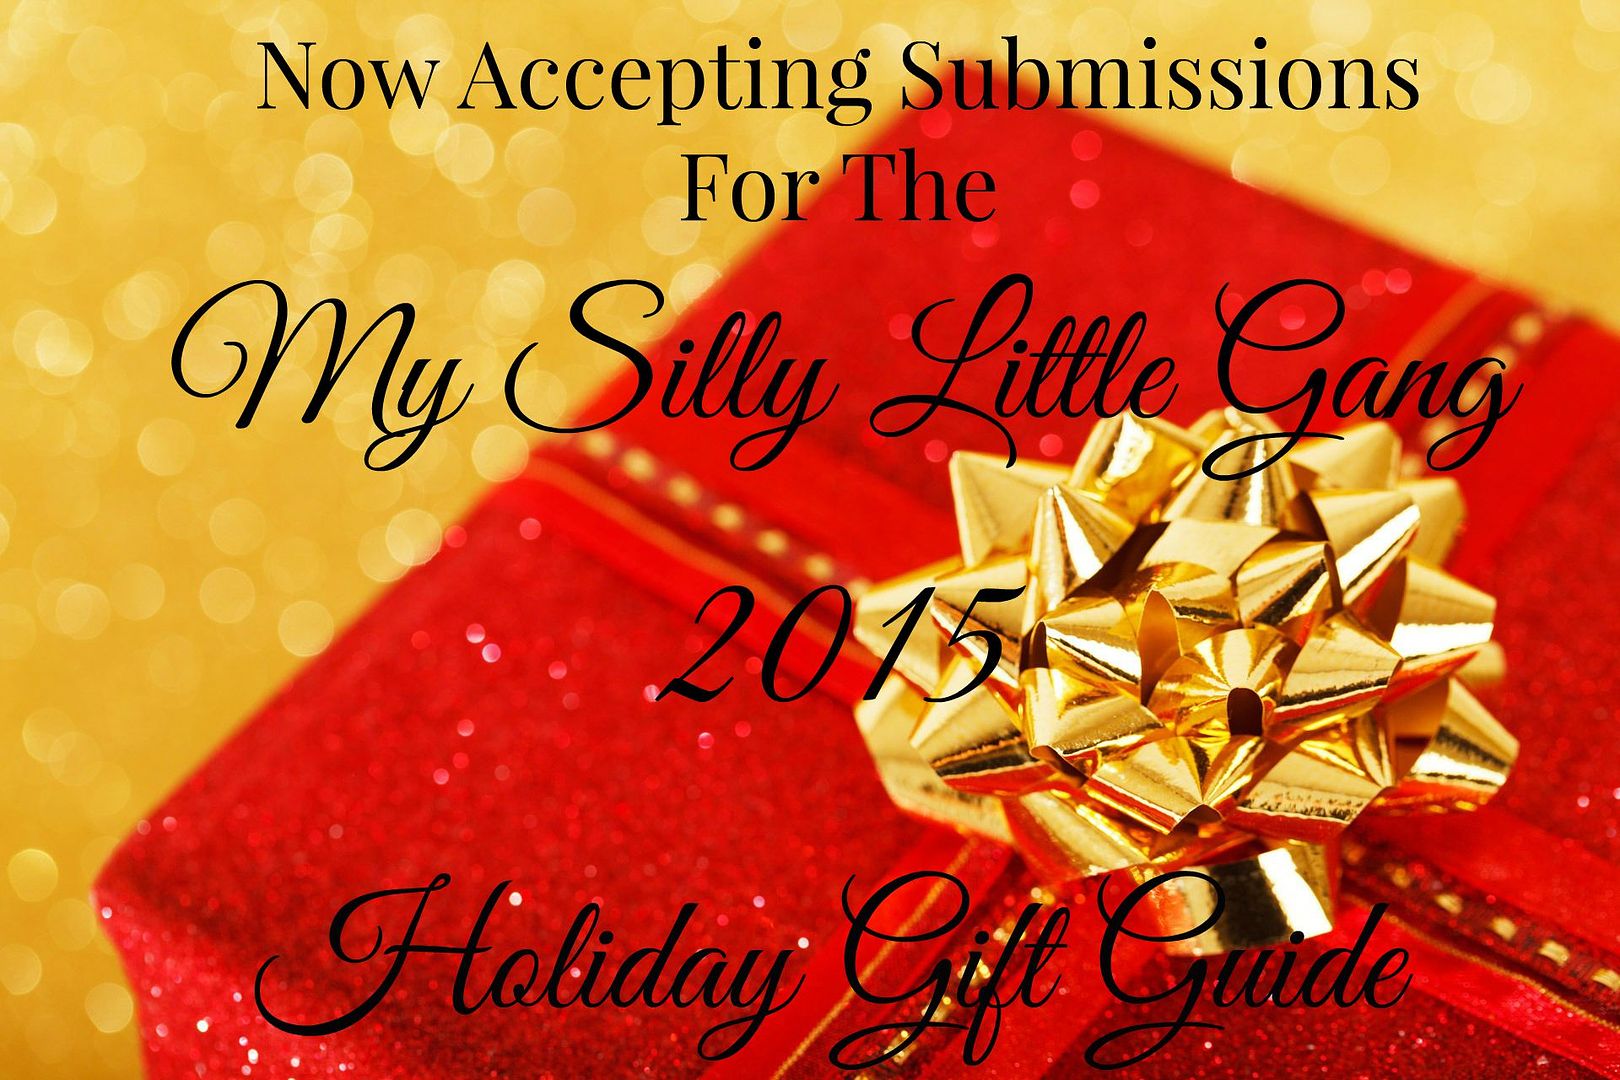 holiday-gift-guide-submissions